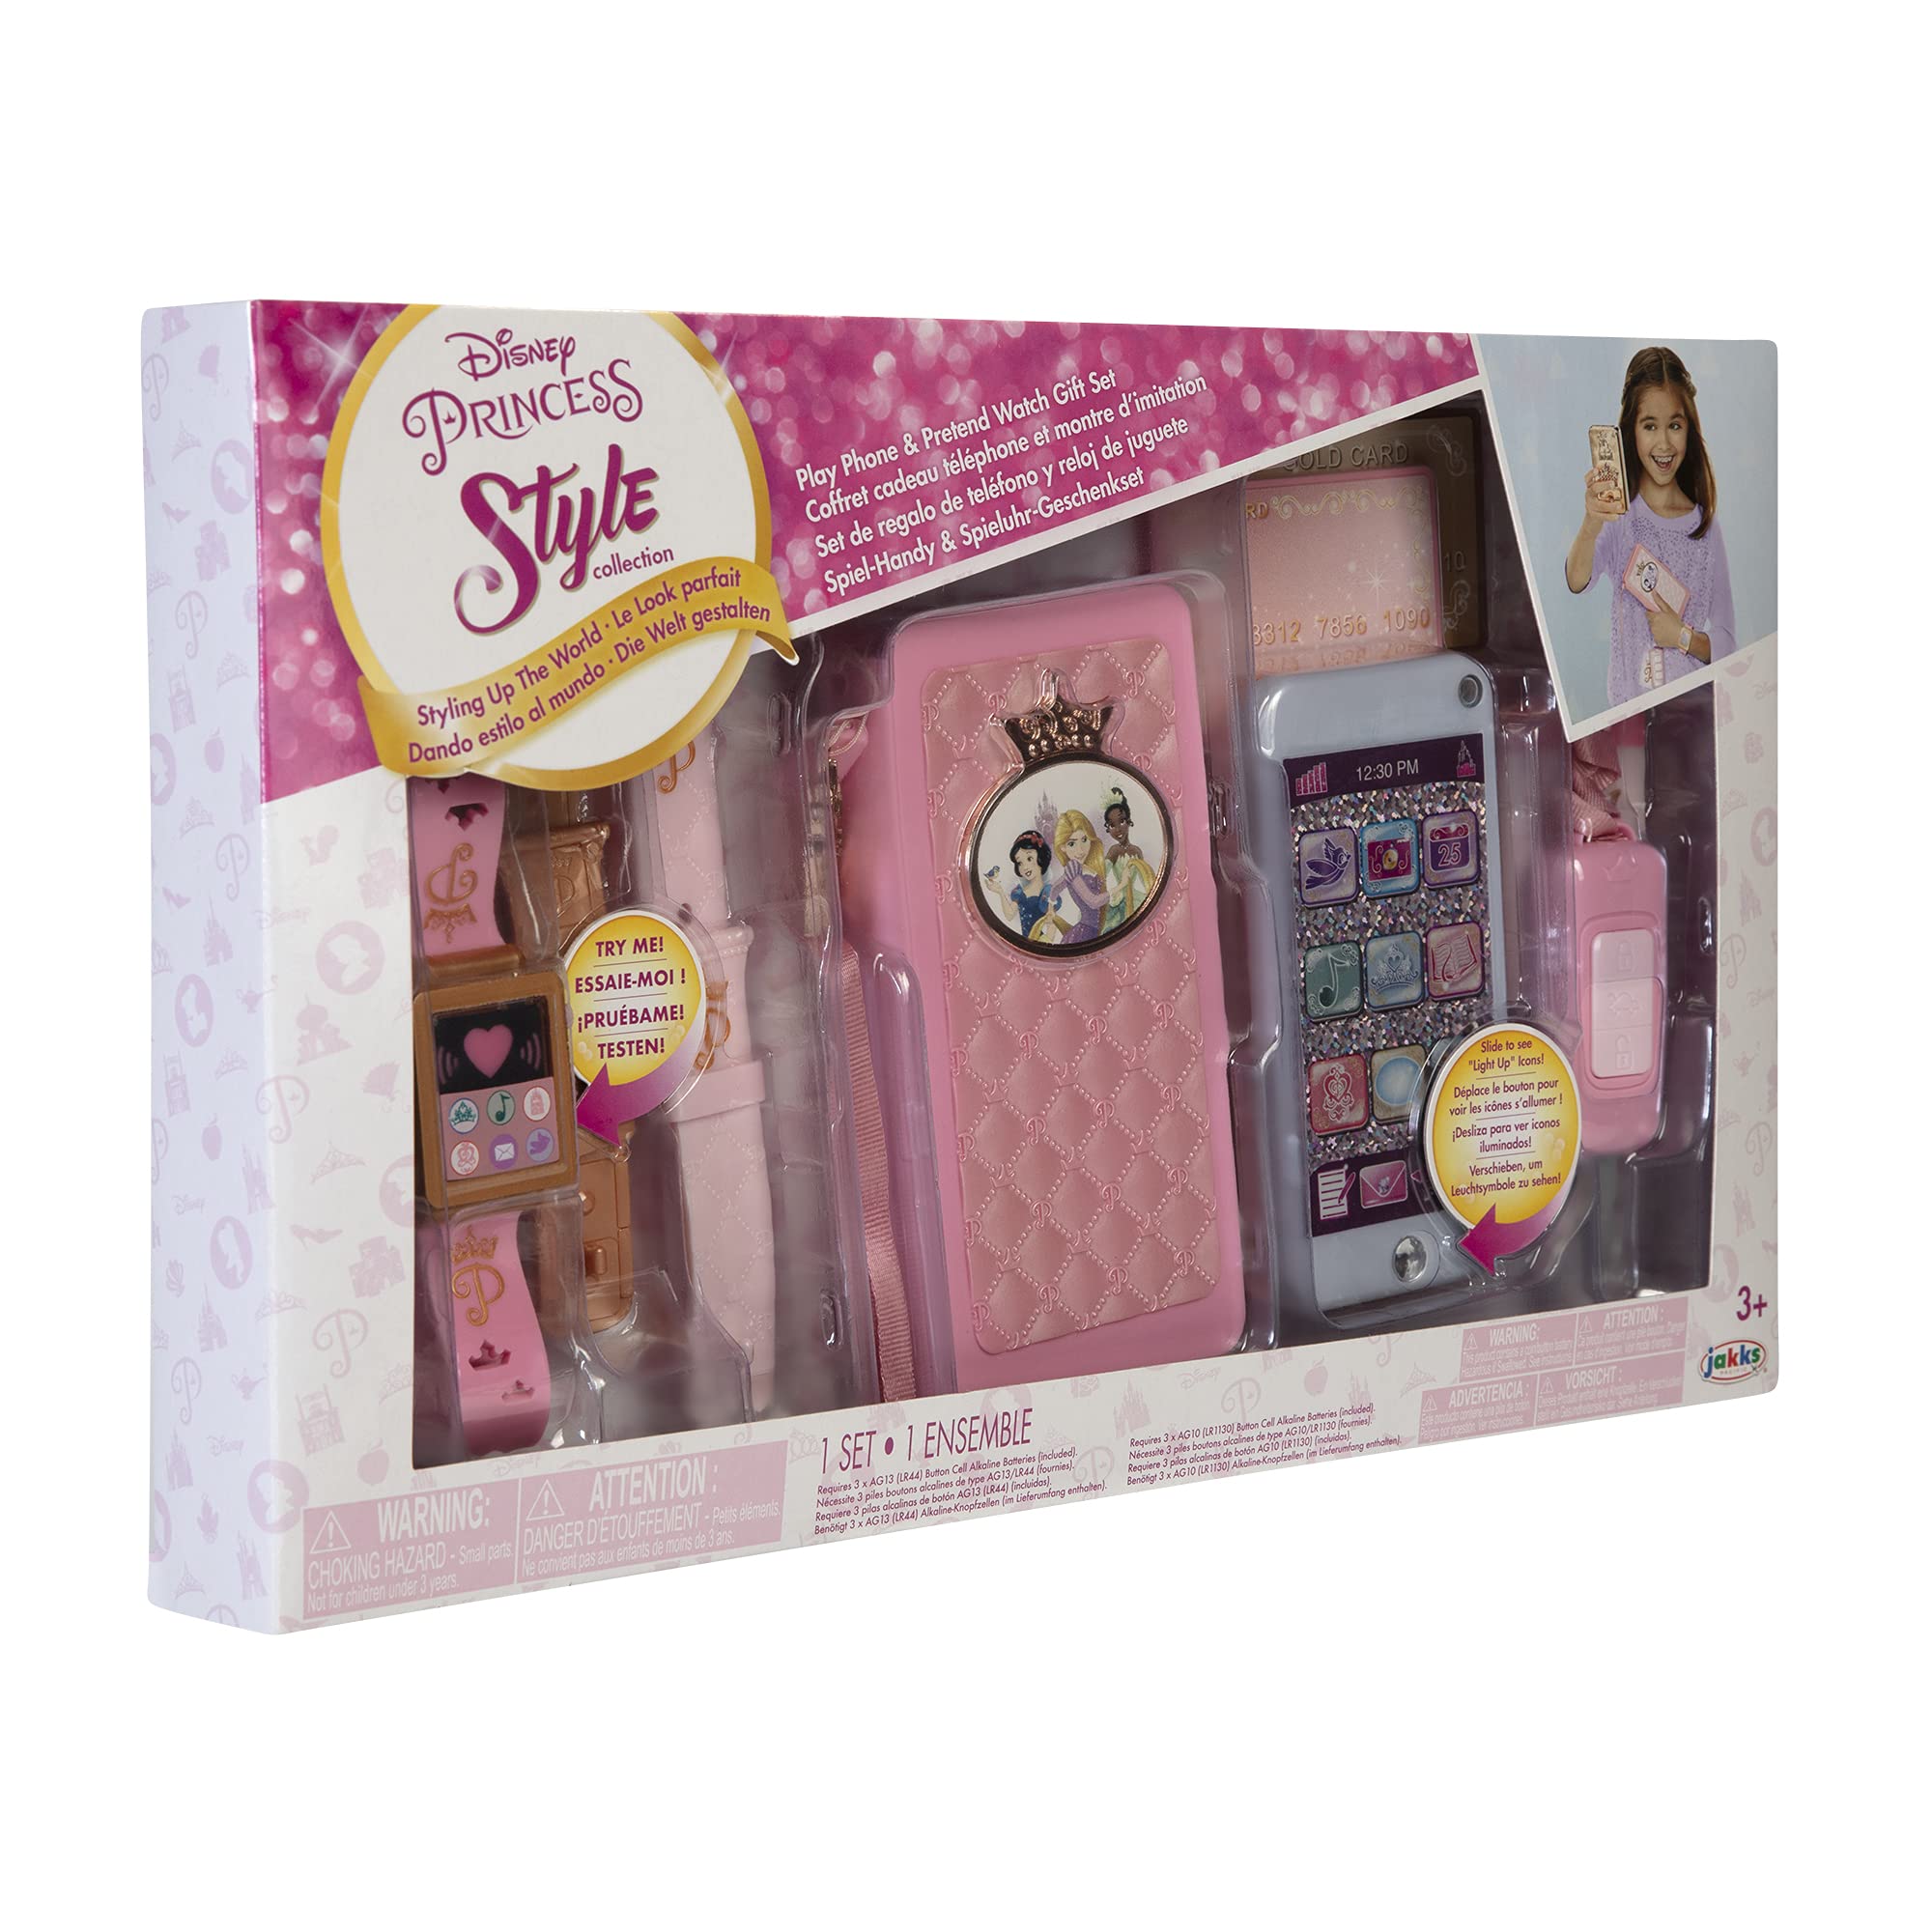 Disney Princess Style Collection Role Play Set with Toy Smartphone and Watch for Girls [Amazon Exclusive]